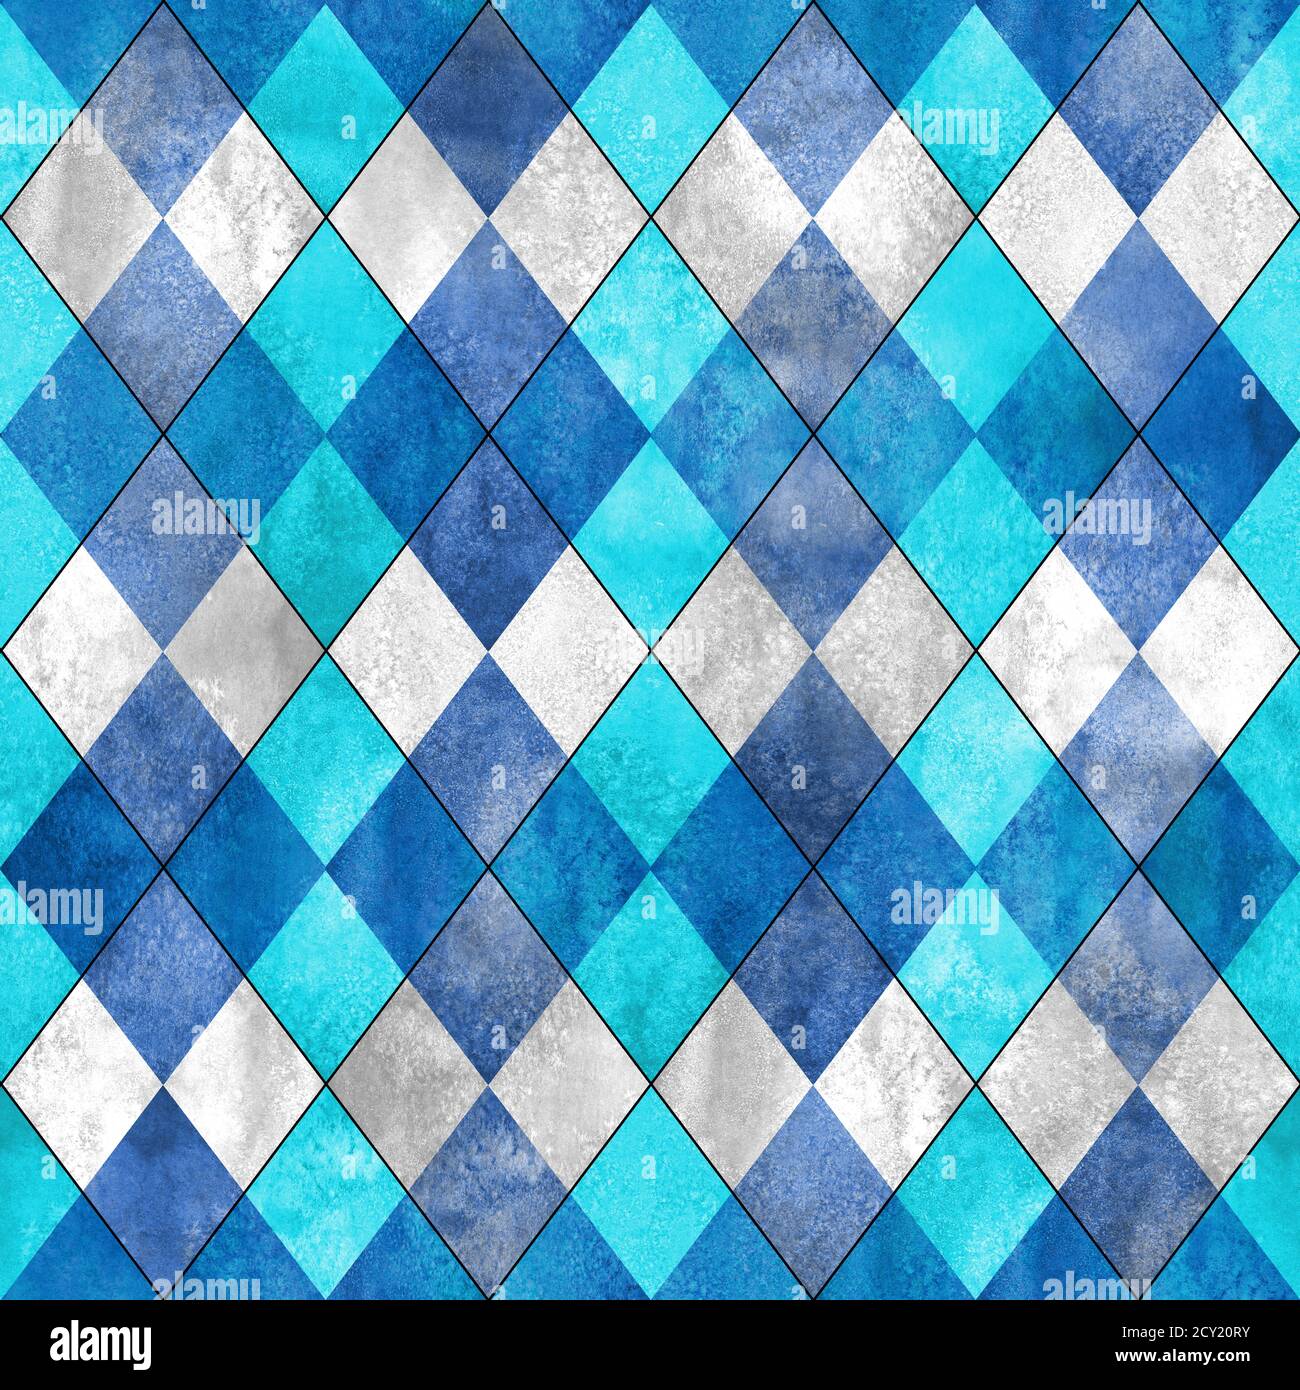 Argyle seamless plaid pattern. Watercolor hand drawn gray blue teal  turquoise texture background. Watercolour diamond shapes background. Print  for clo Stock Photo - Alamy